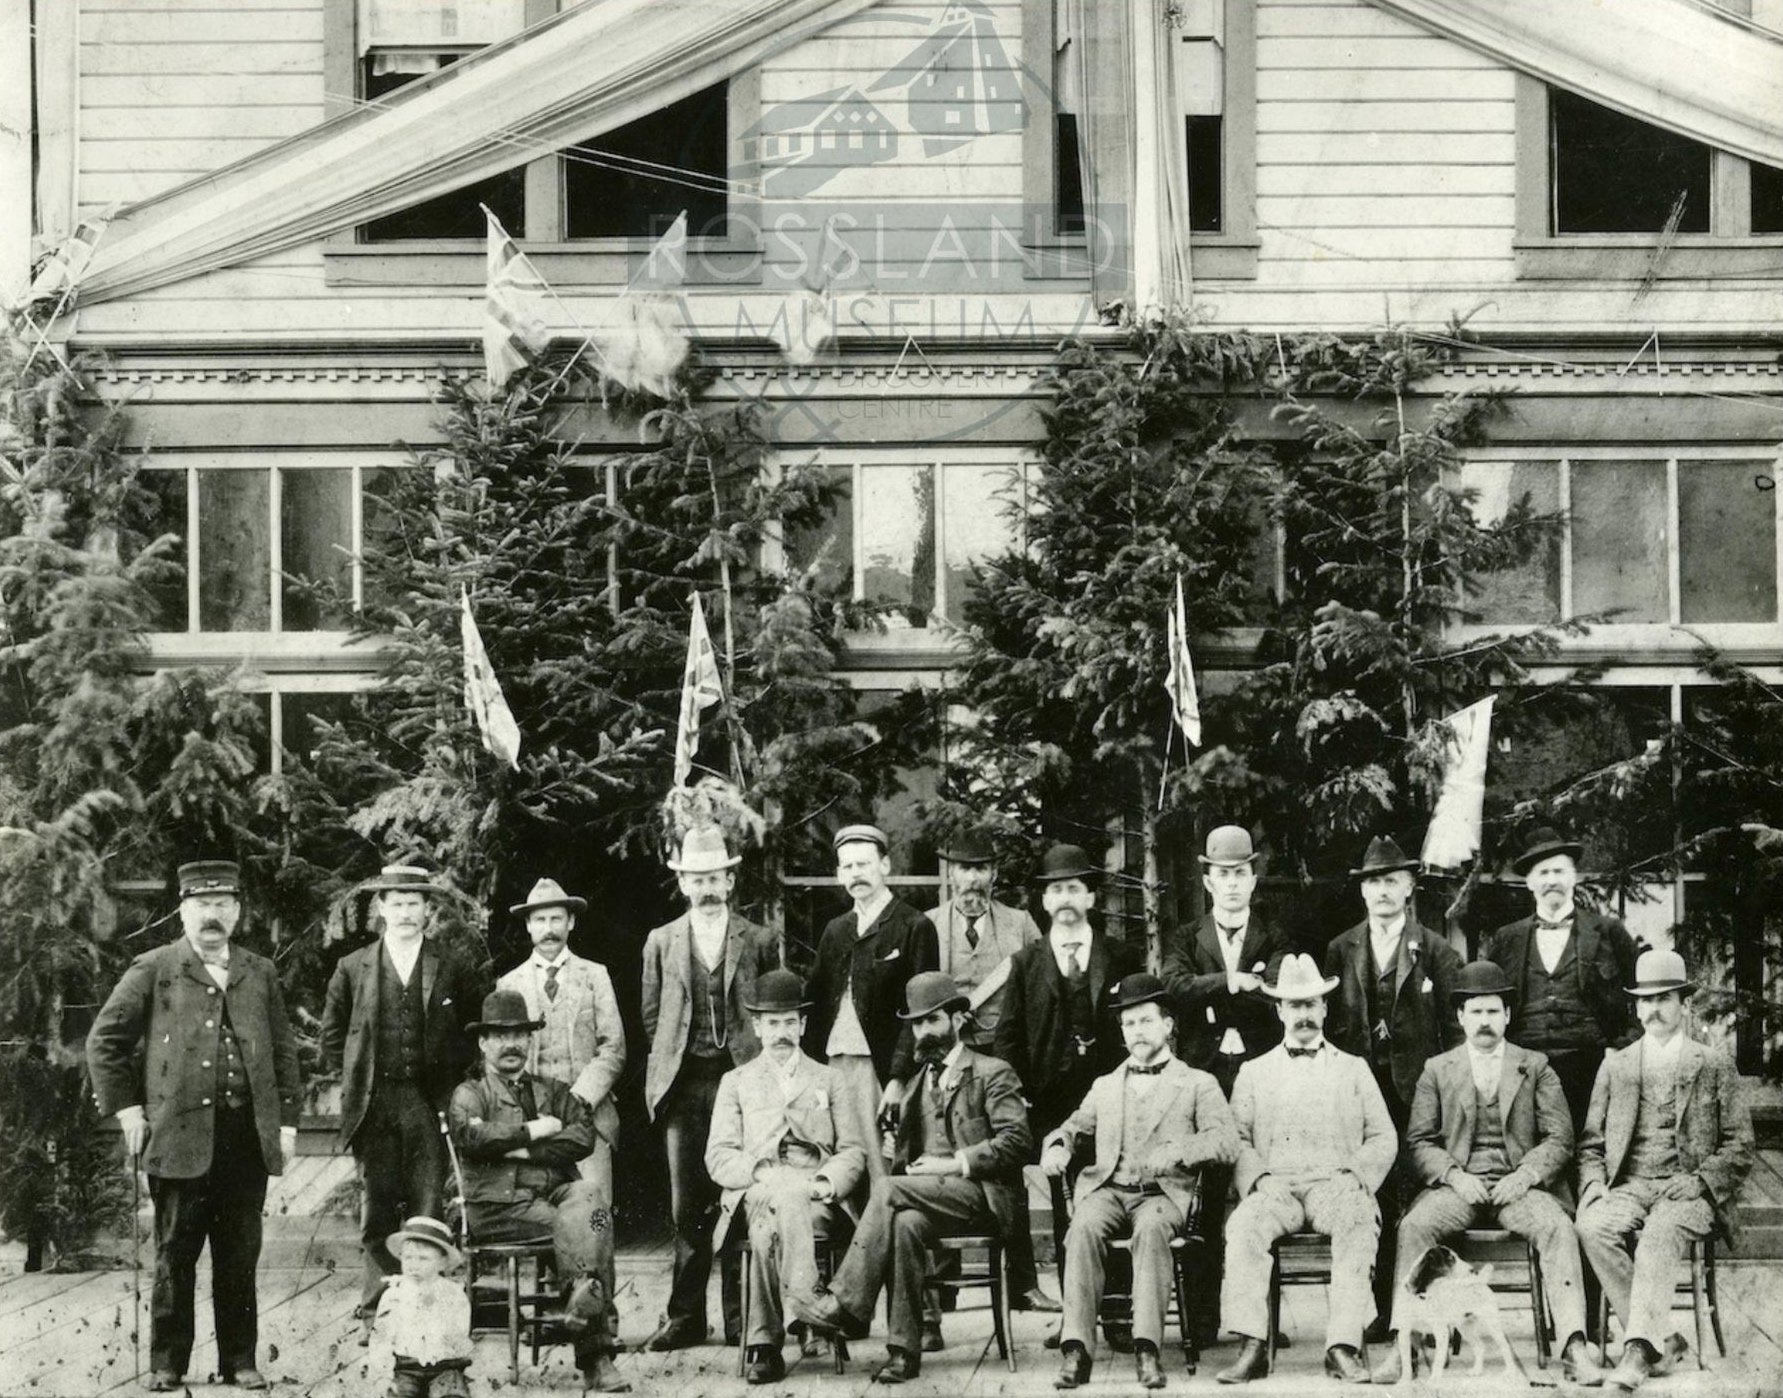   2297.0023 : Rossland Pioneers, 1898.  Left to Right: John Ingram, Chief of Police; T.H Long, Sanitary Inspector; S.W Forteath; William McQueen, City Clerk; W.H Falding, City Auditor; Ed Noise; G.A Jordon; Hart Mcharg; W.M Harp; Dr. Reddick; Sitting